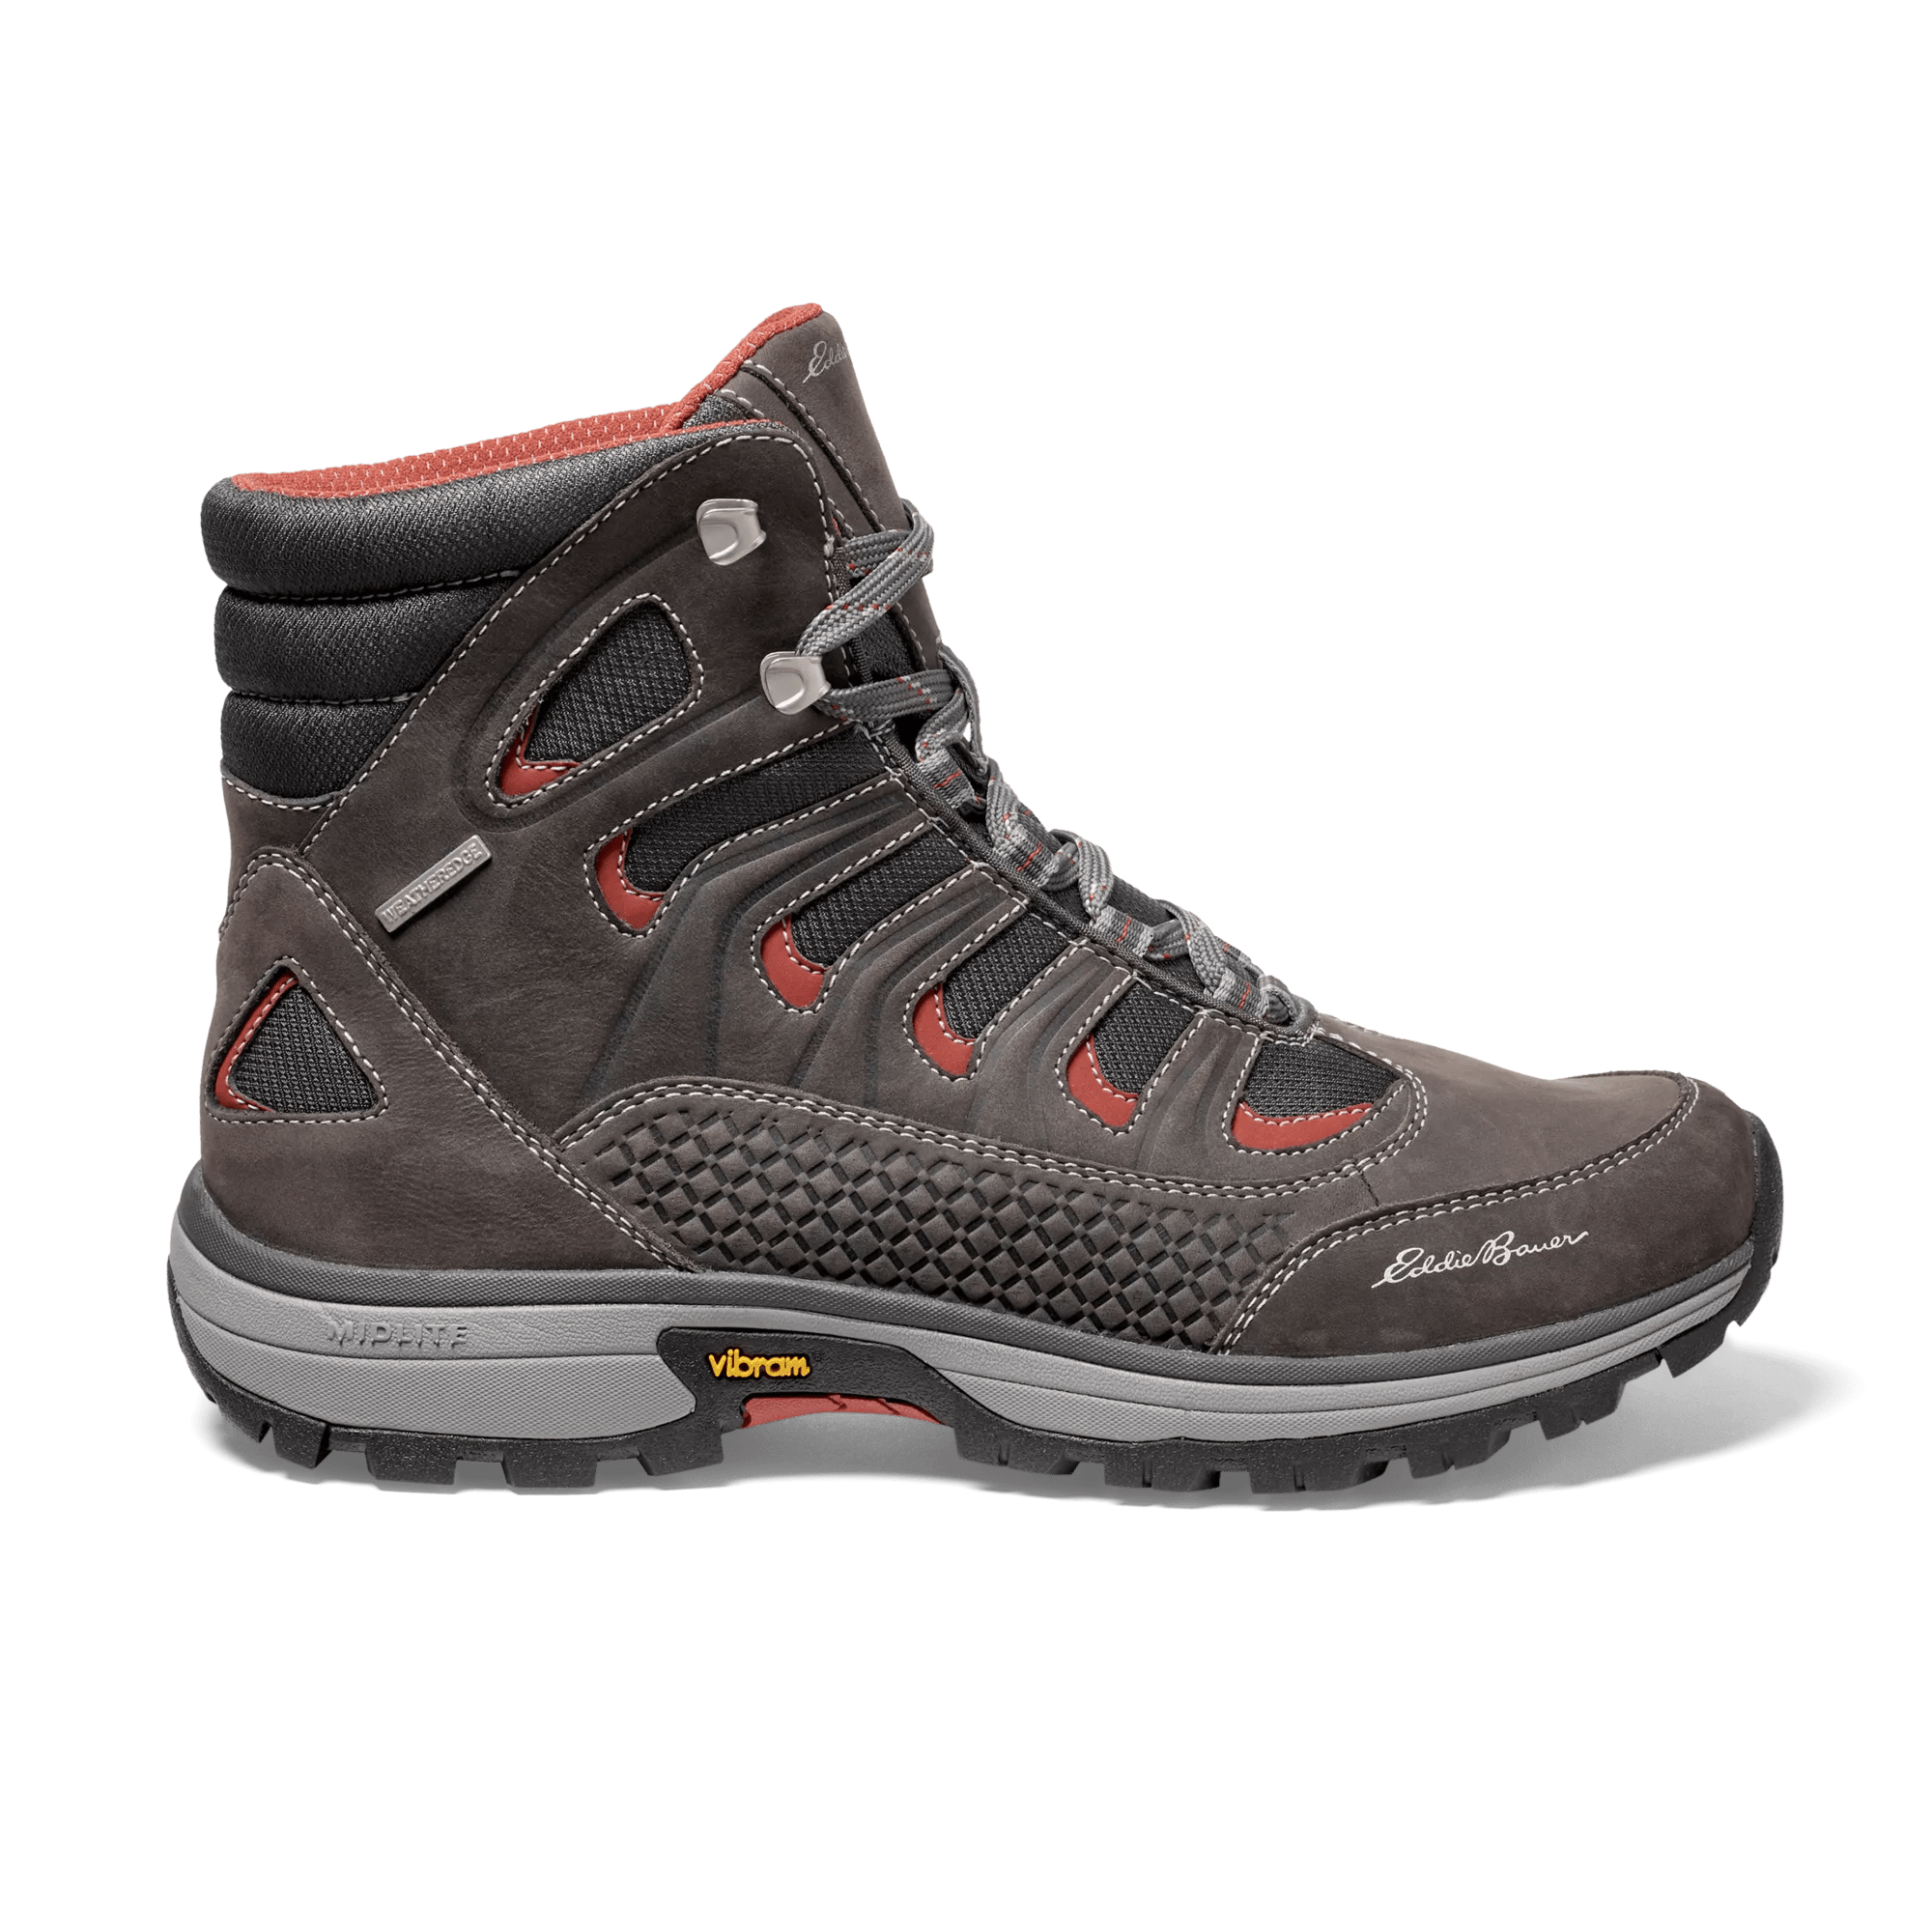 Guide Pro Hiking Boots